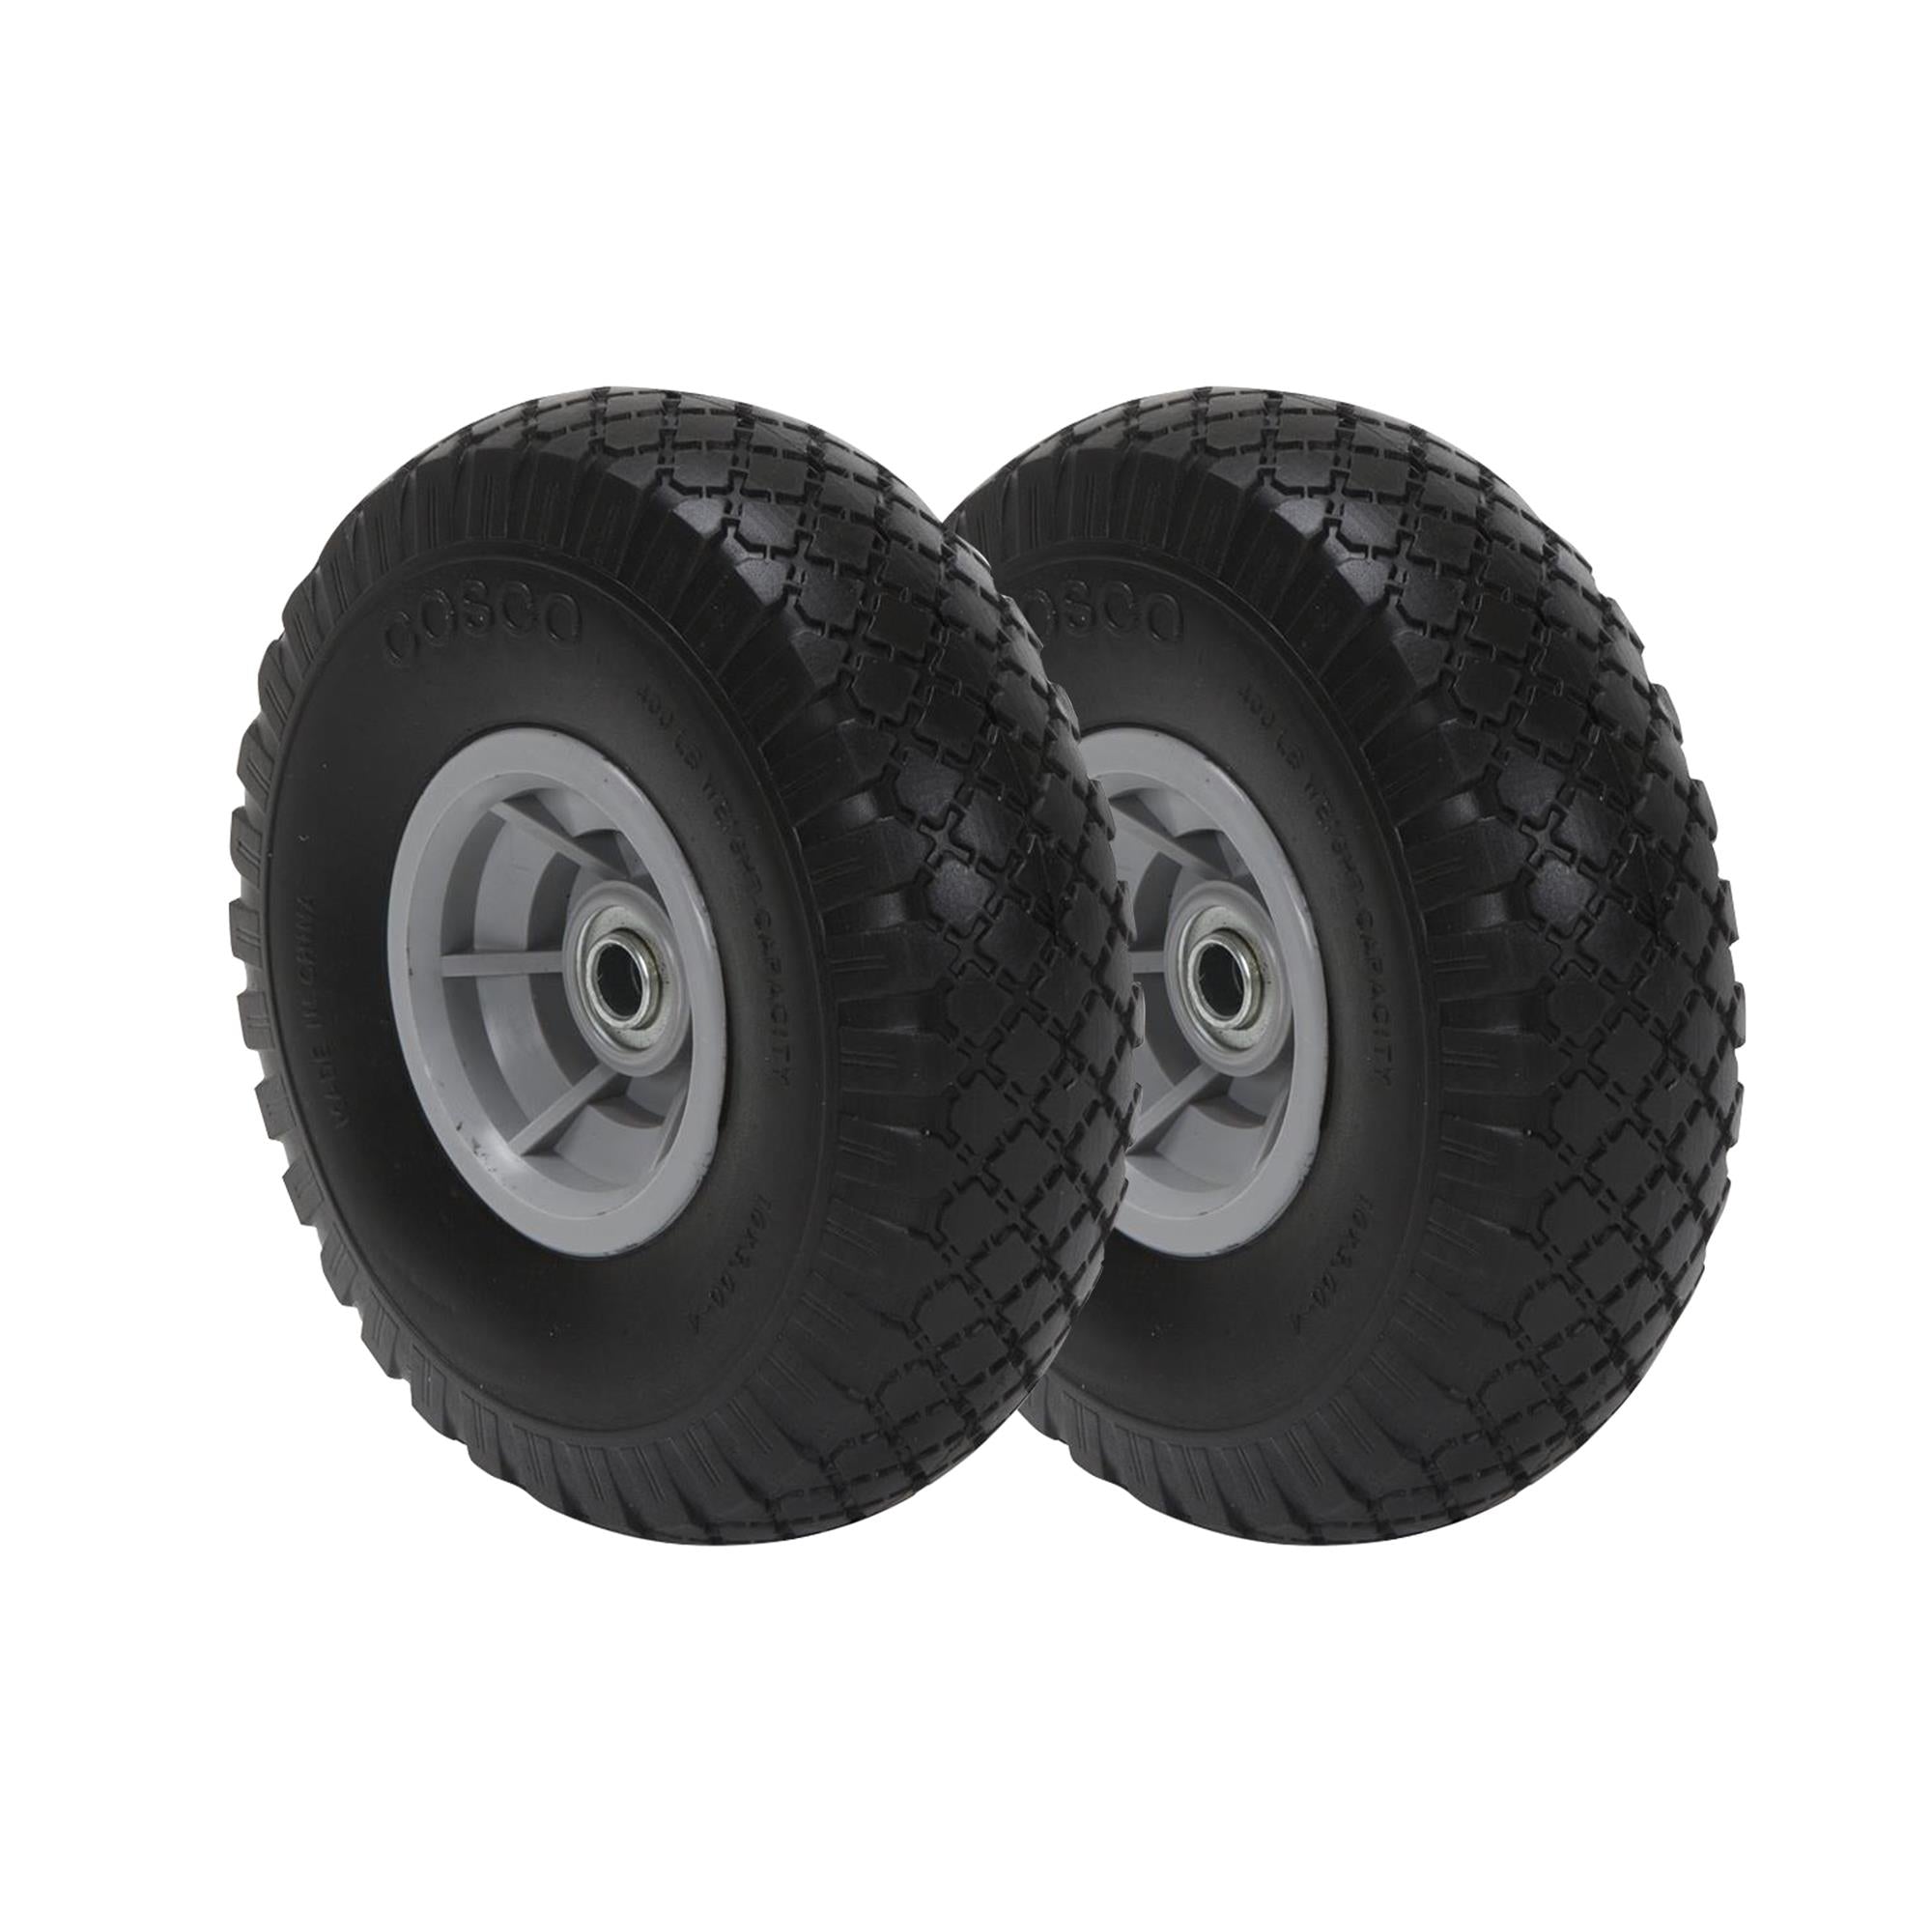 10-Inch Flat-Free Replacement Wheel for Hand Trucks - Black - N/A